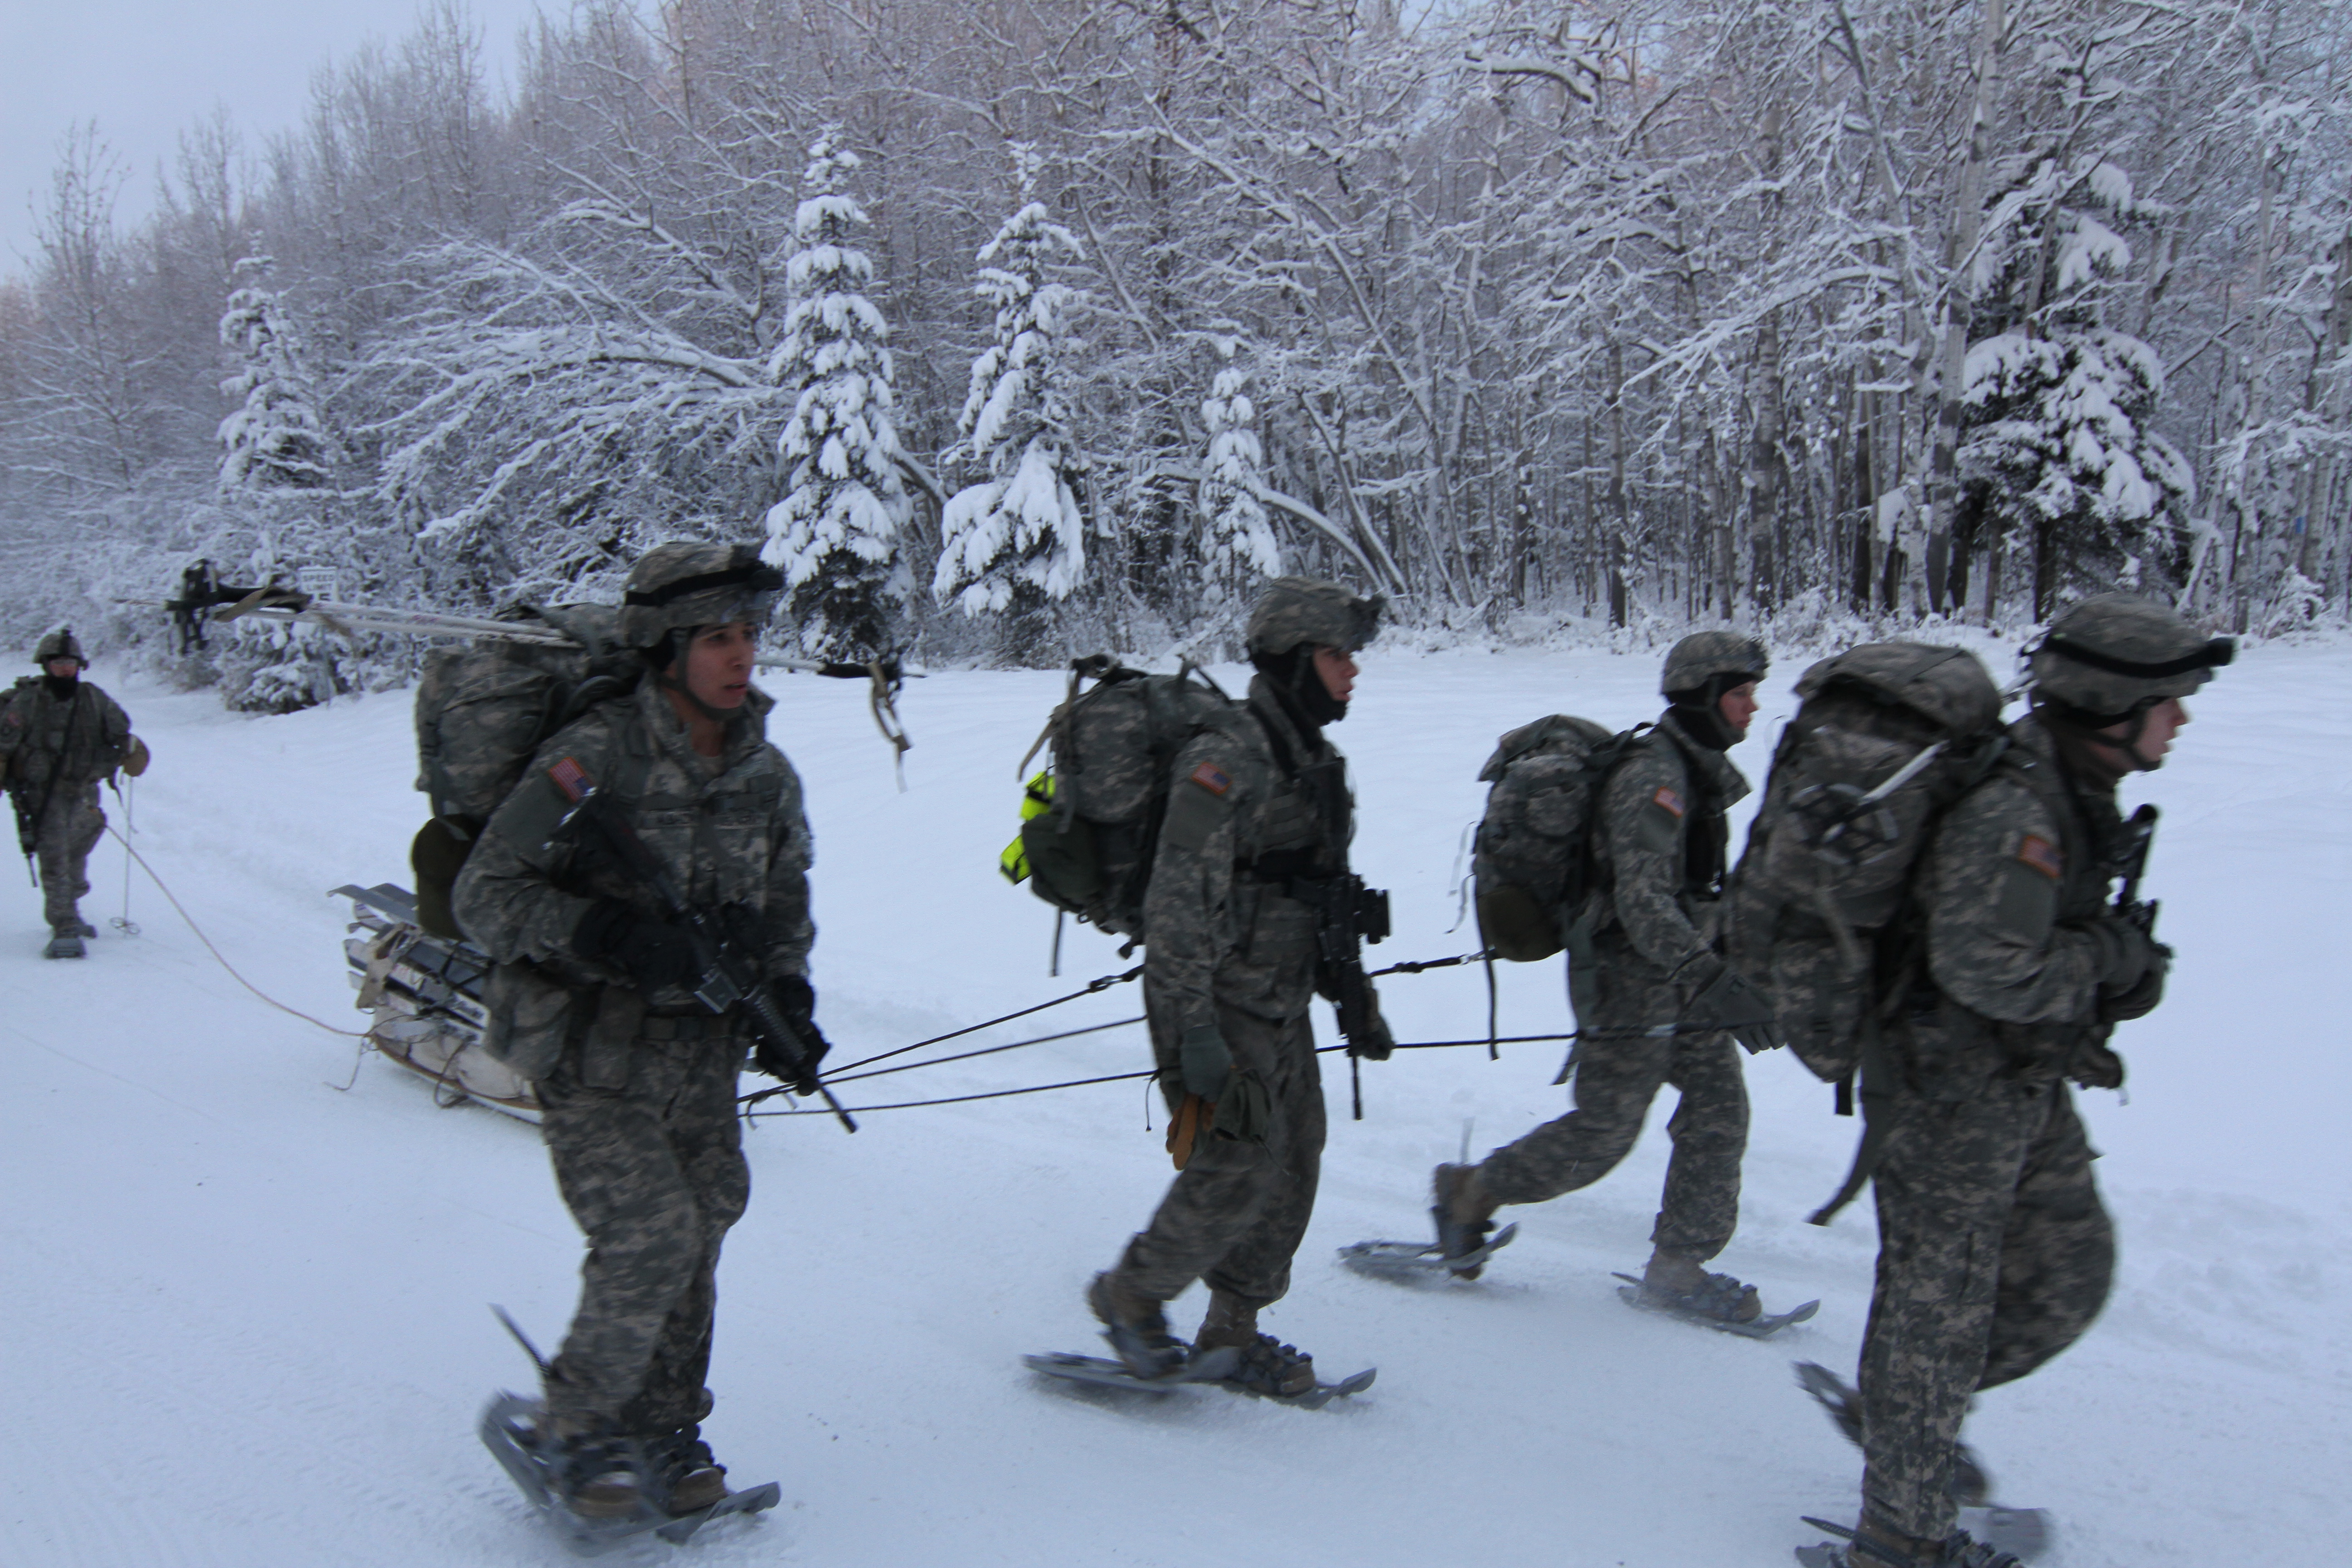 Soldiers in the snow